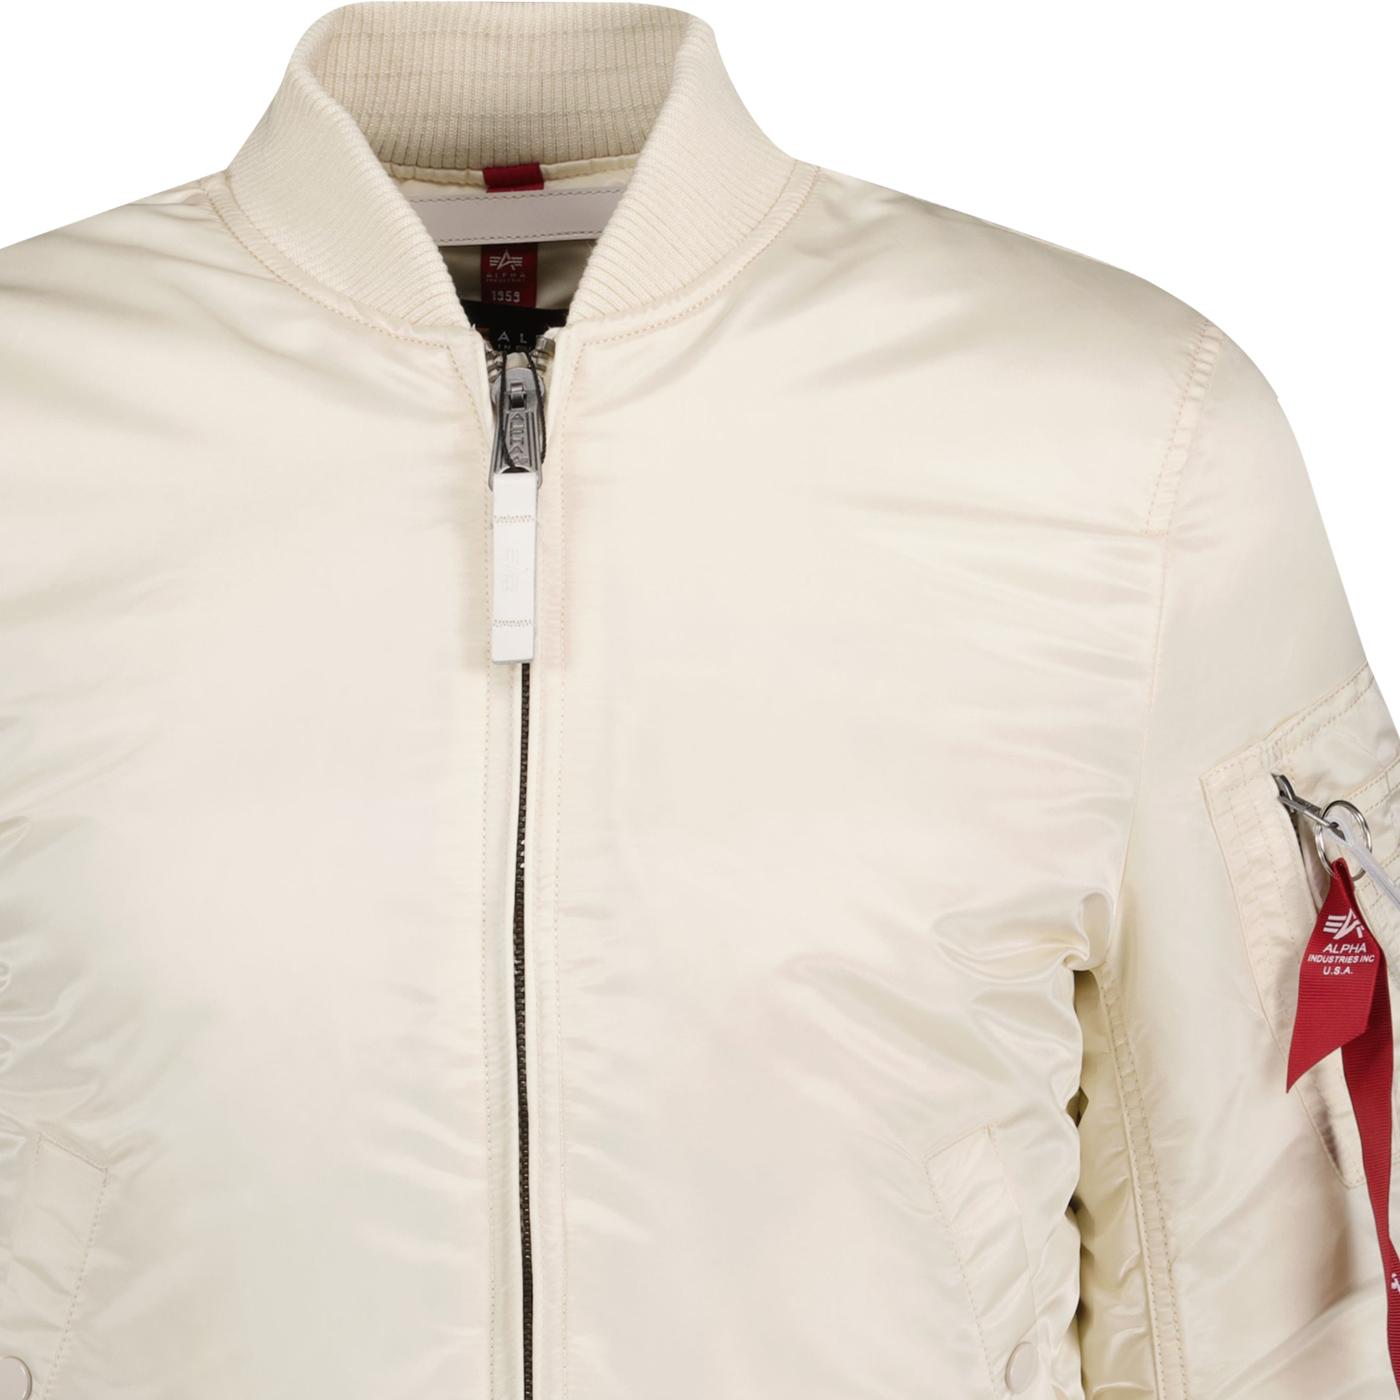 ALPHA Industries MA1 VF Mod in White Jacket Bomber Stream